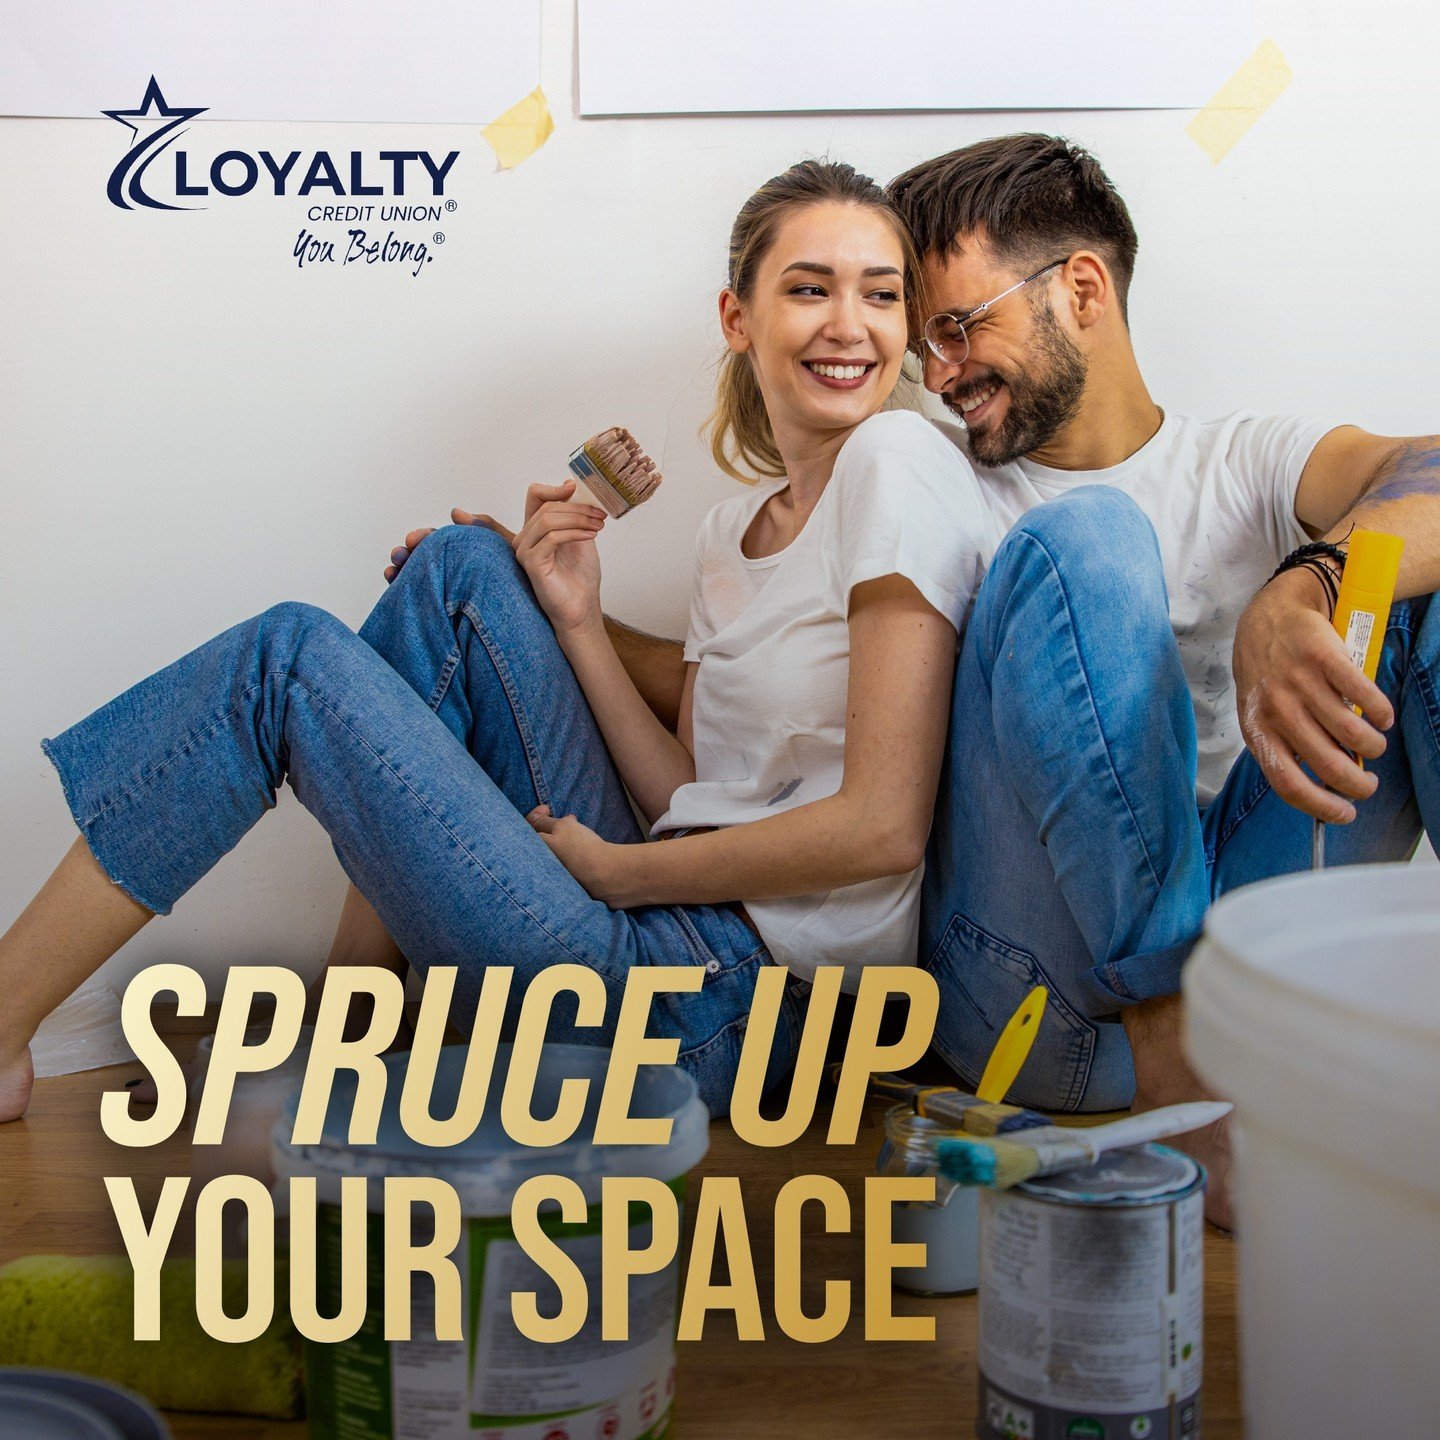 Transform your list of tasks into a showcase of achievements with our Fixed Rate AND Revolving Home Equity Line of Credit tailored for home improvements! 🏠

Upgrade your living space and elevate your comfort seamlessly.💫 Explore options like paying